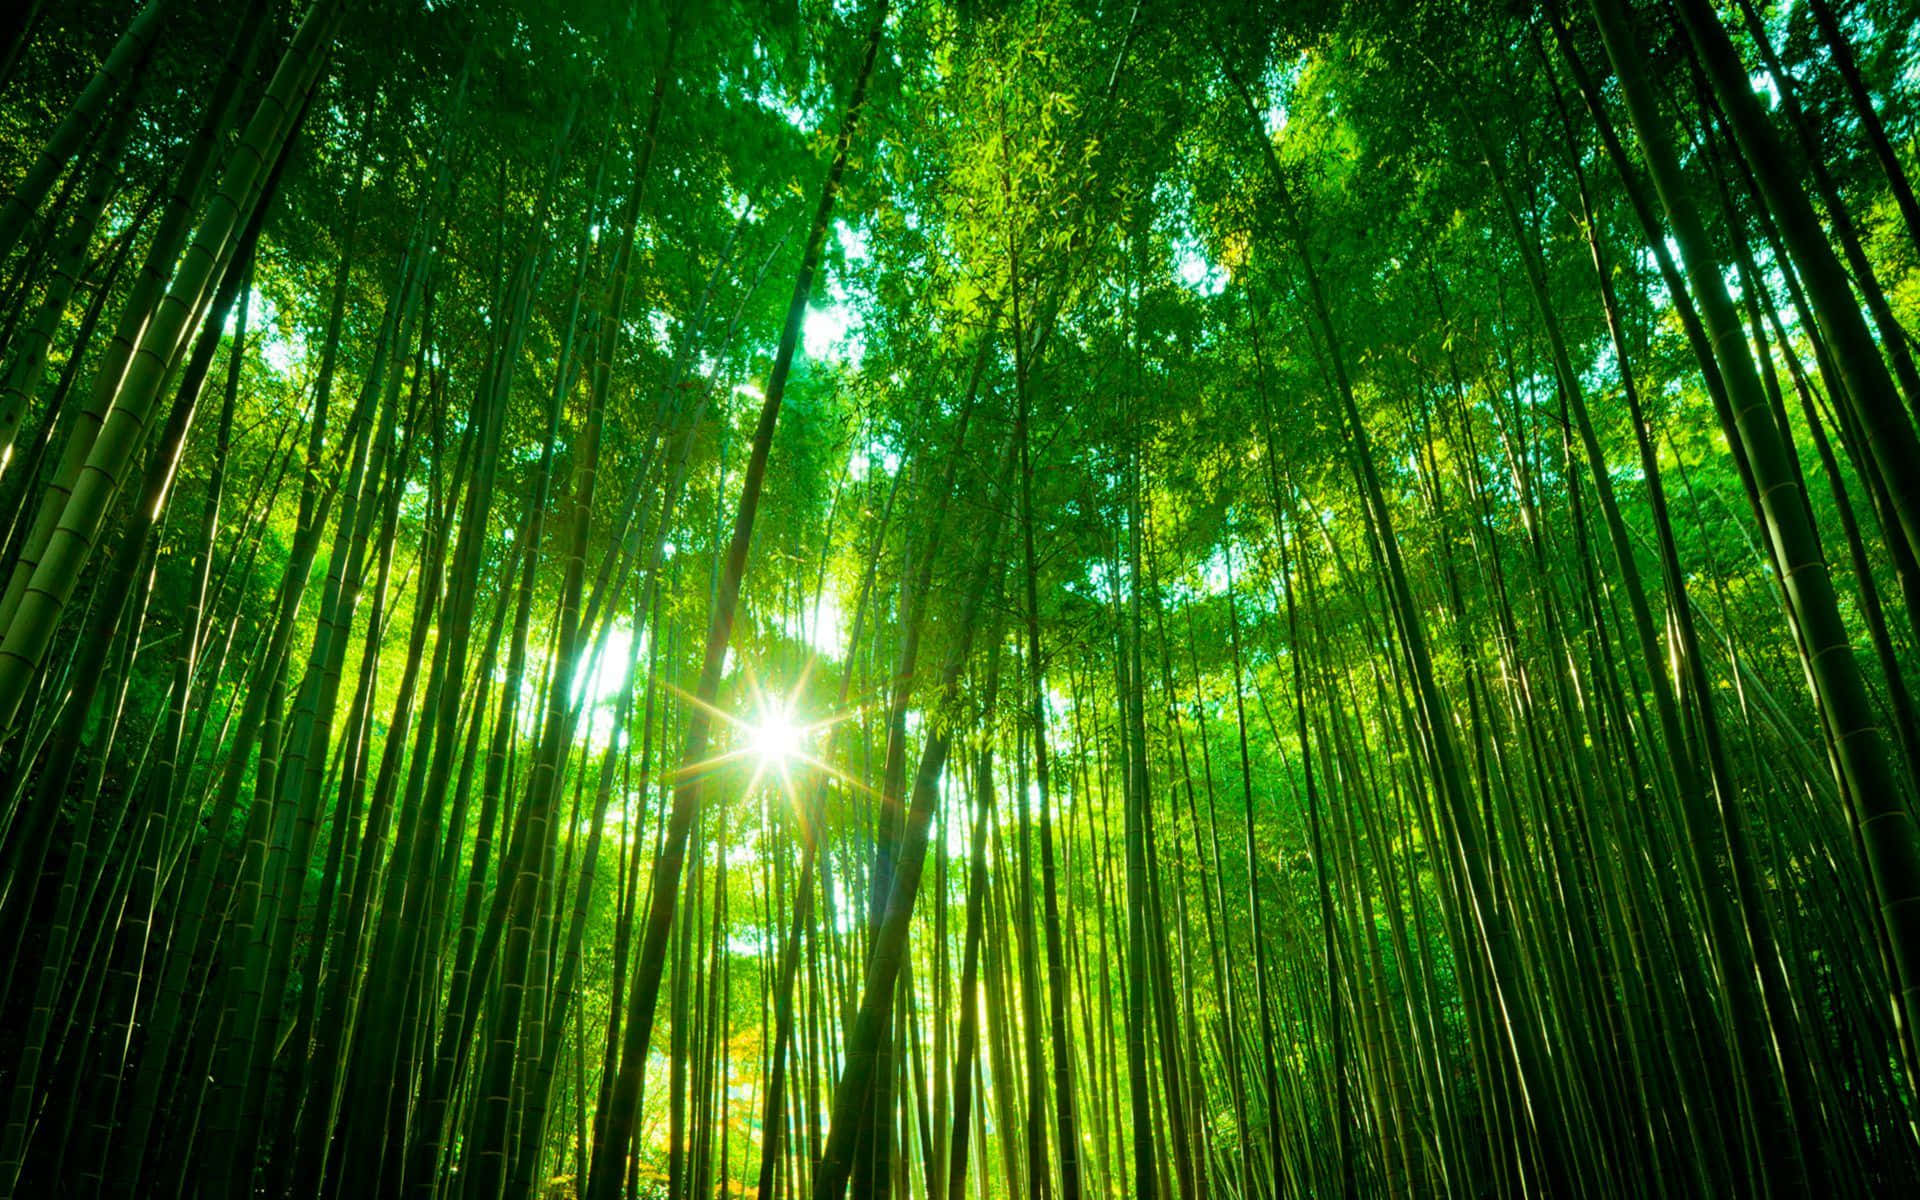 Bamboo Forest With Sunlight Shining Through The Trees Wallpaper